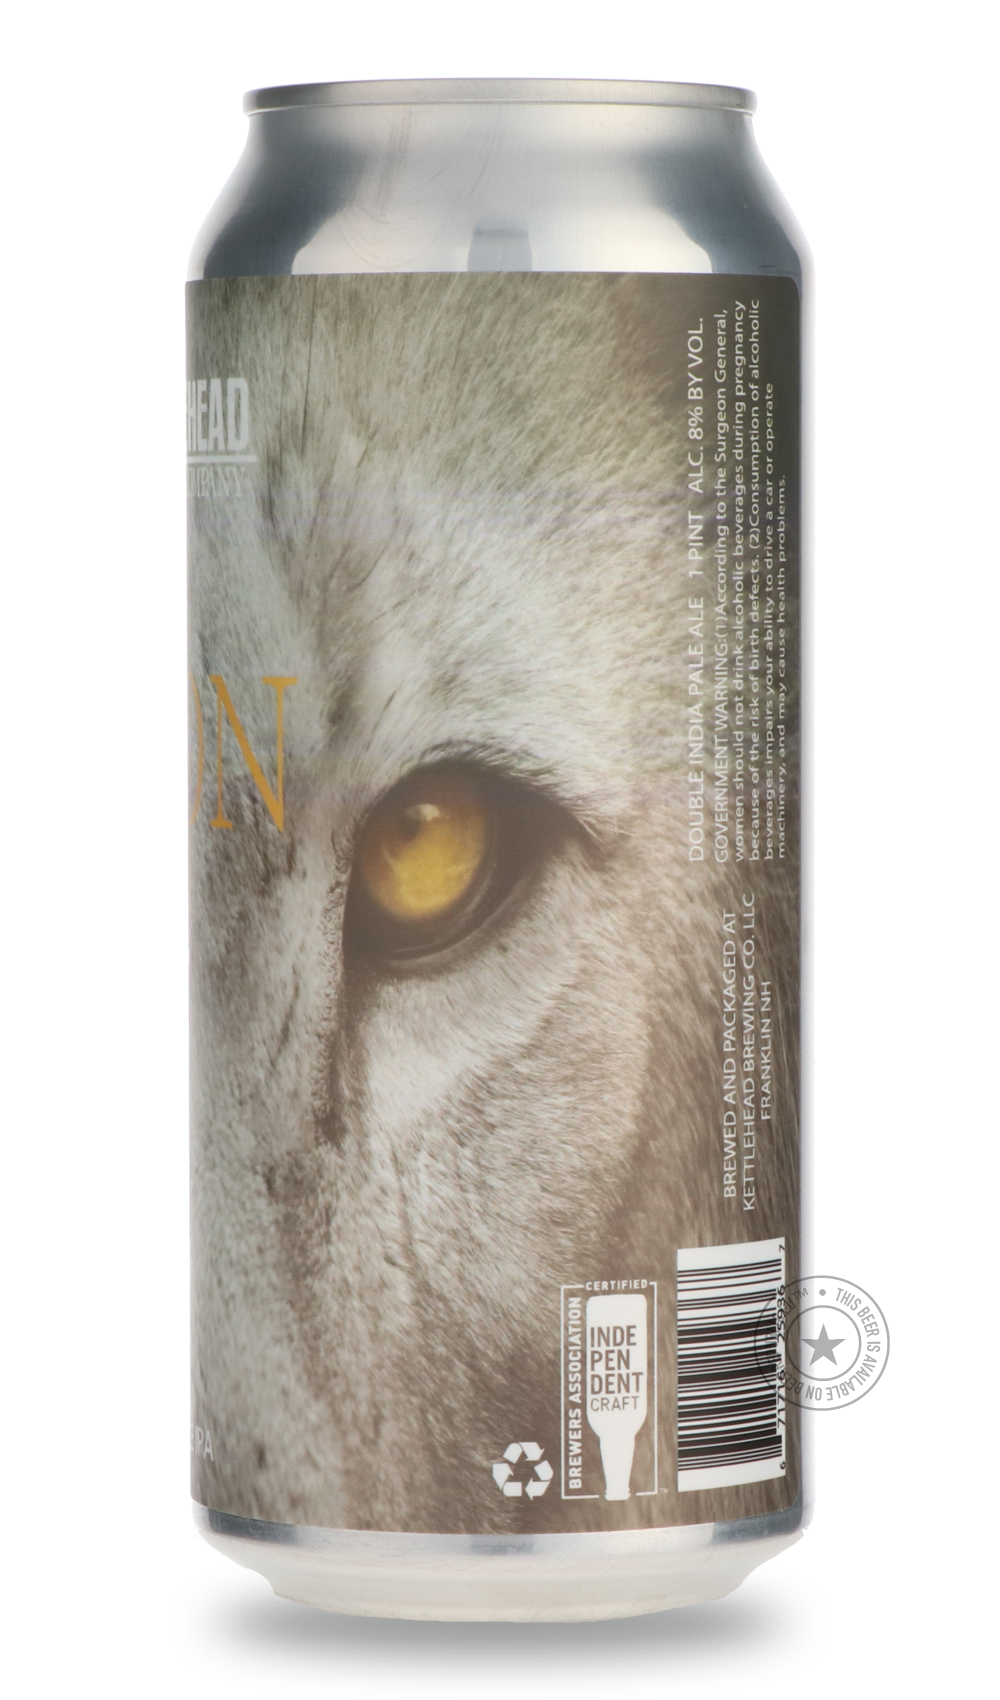 -Kettlehead- Lion-IPA- Only @ Beer Republic - The best online beer store for American & Canadian craft beer - Buy beer online from the USA and Canada - Bier online kopen - Amerikaans bier kopen - Craft beer store - Craft beer kopen - Amerikanisch bier kaufen - Bier online kaufen - Acheter biere online - IPA - Stout - Porter - New England IPA - Hazy IPA - Imperial Stout - Barrel Aged - Barrel Aged Imperial Stout - Brown - Dark beer - Blond - Blonde - Pilsner - Lager - Wheat - Weizen - Amber - Barley Wine - Q